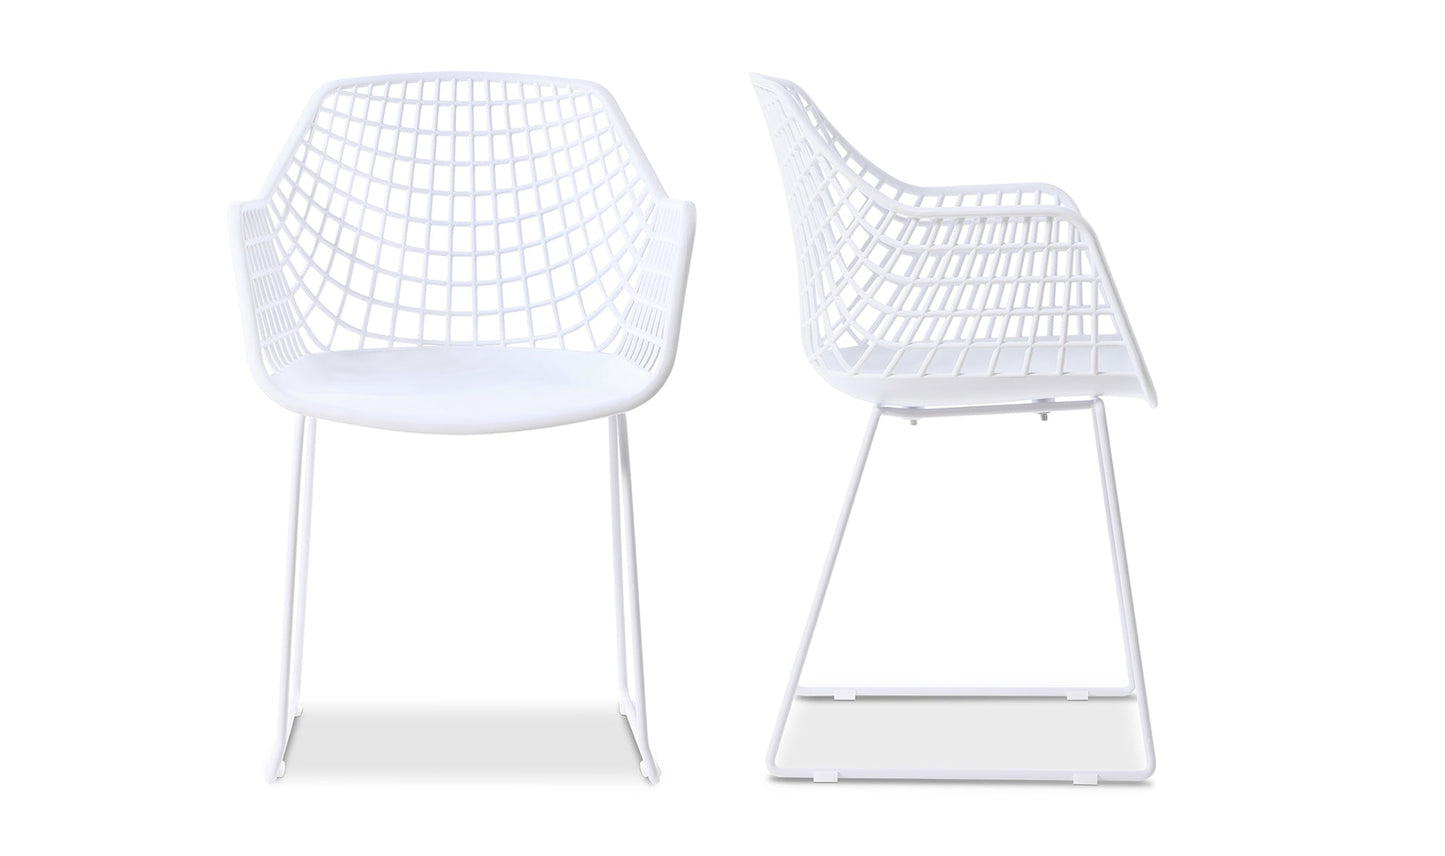 HONOLULU CHAIR WHITE -SET OF TWO